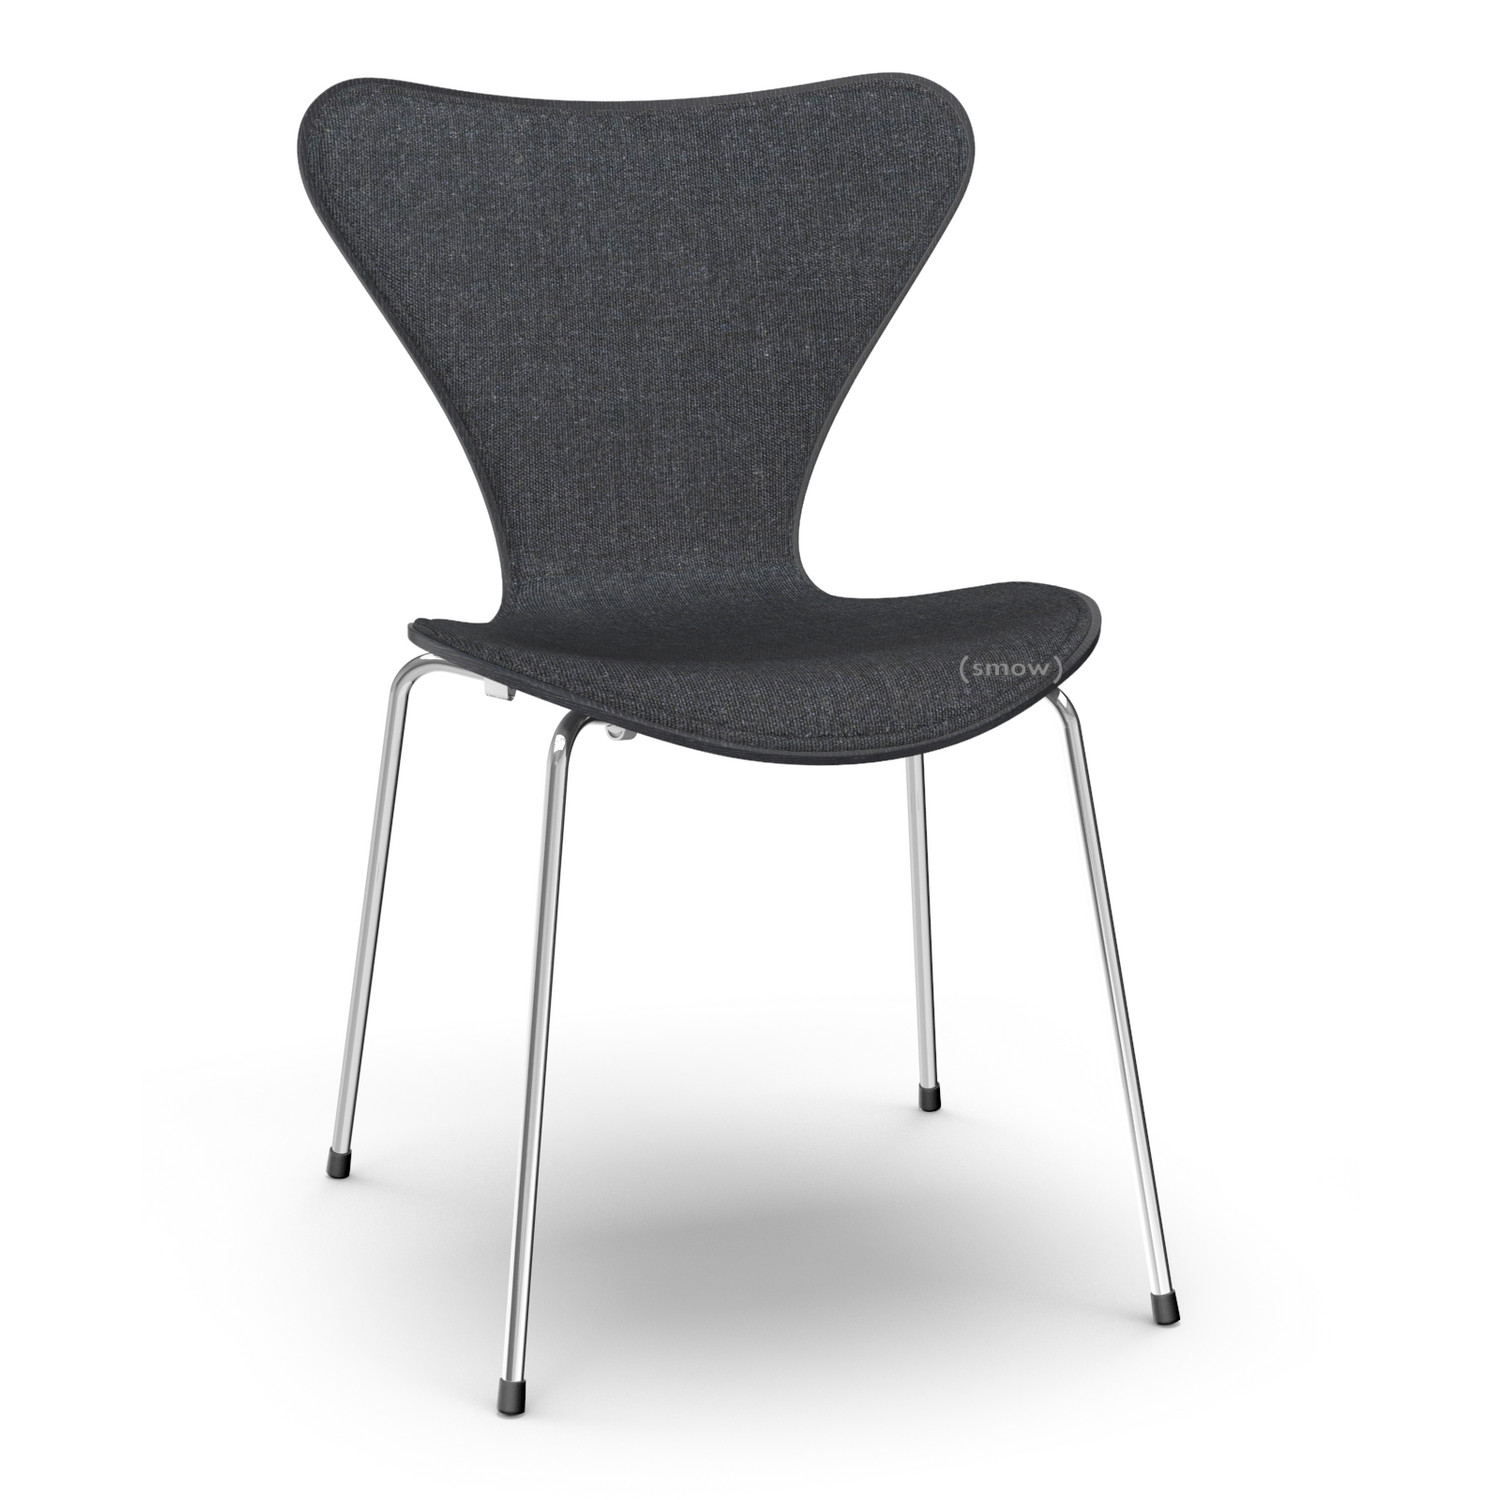 Series 7 Chair Front Upholstered